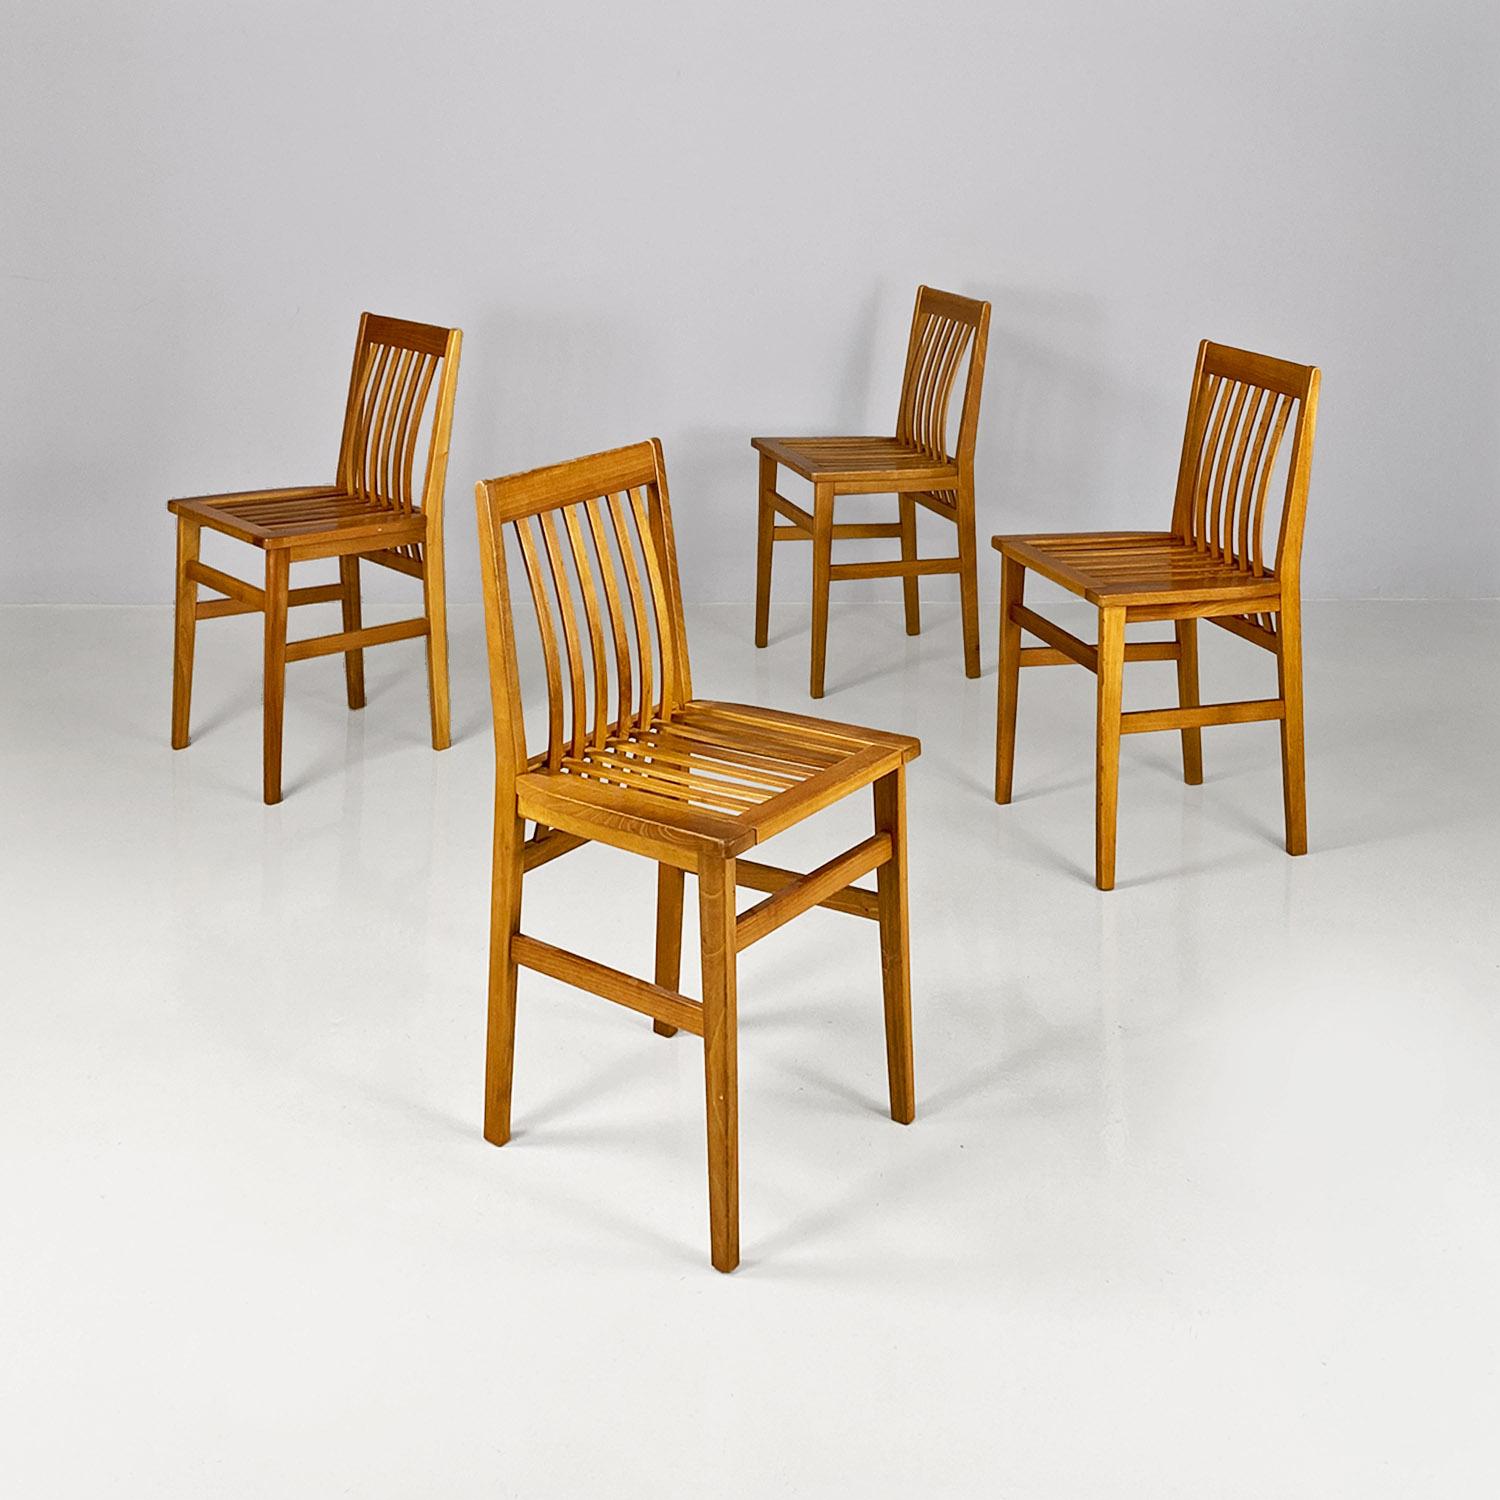 Italian modern set of four wooden Milano chairs by Aldo Rossi for Molteni, 1987.
Set of four Milano model chairs, with a light wooden structure with a square shape, with a backrest and seat made of parallel curved slats. Not bulky and very